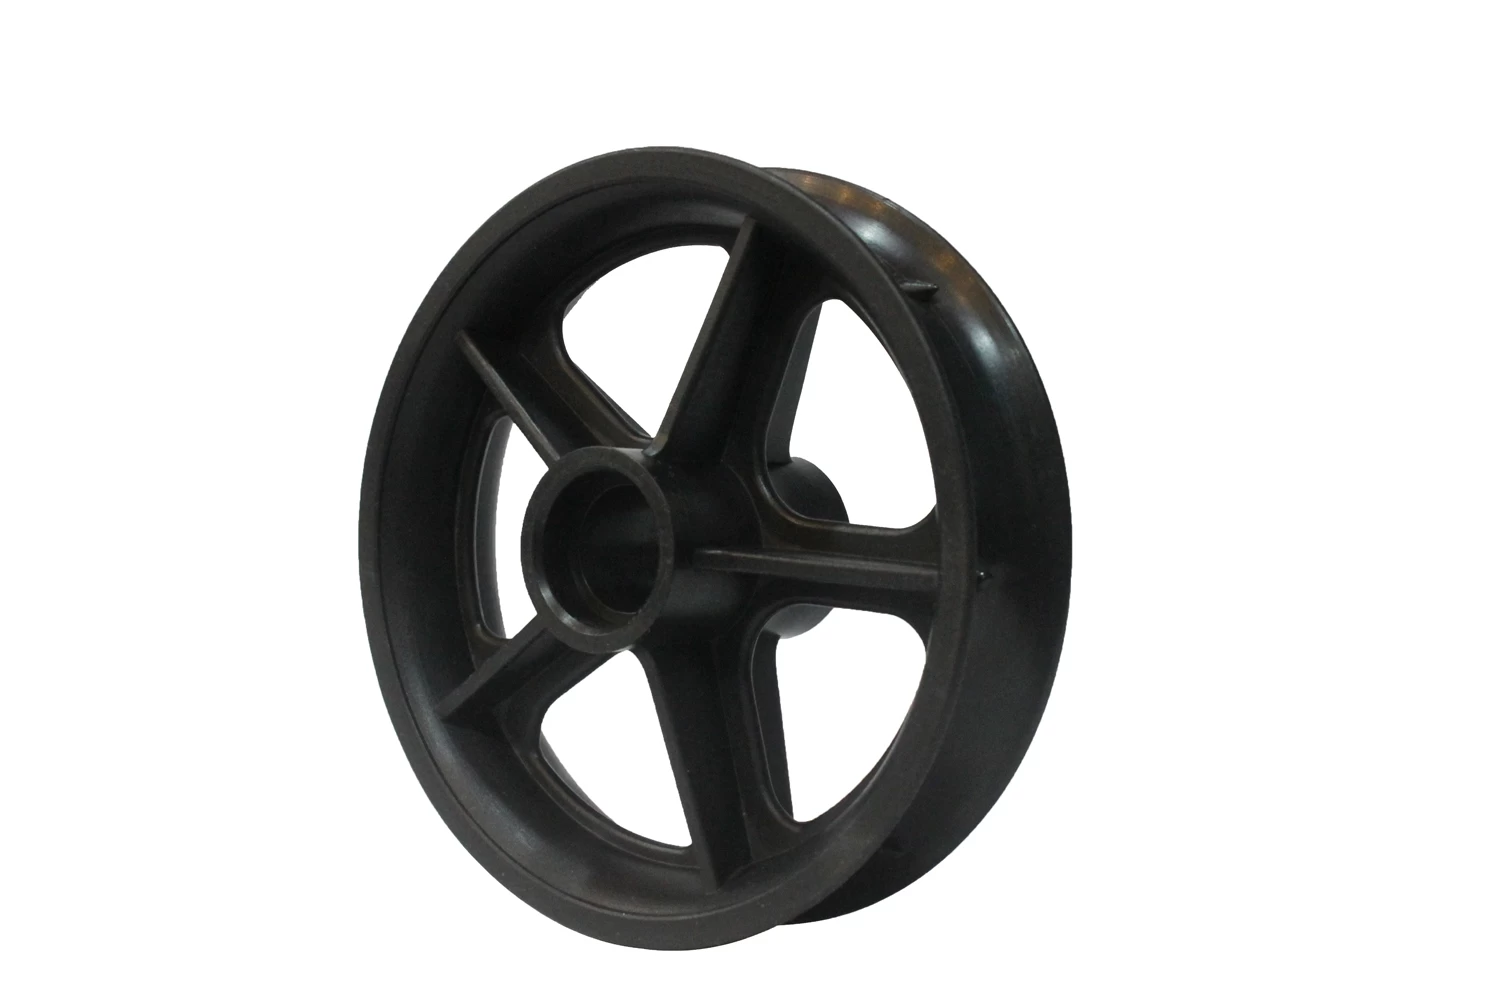 China whole flat free solid wheel,Solid Tires,pu foam tire,polyurethane tire fill fabrikant